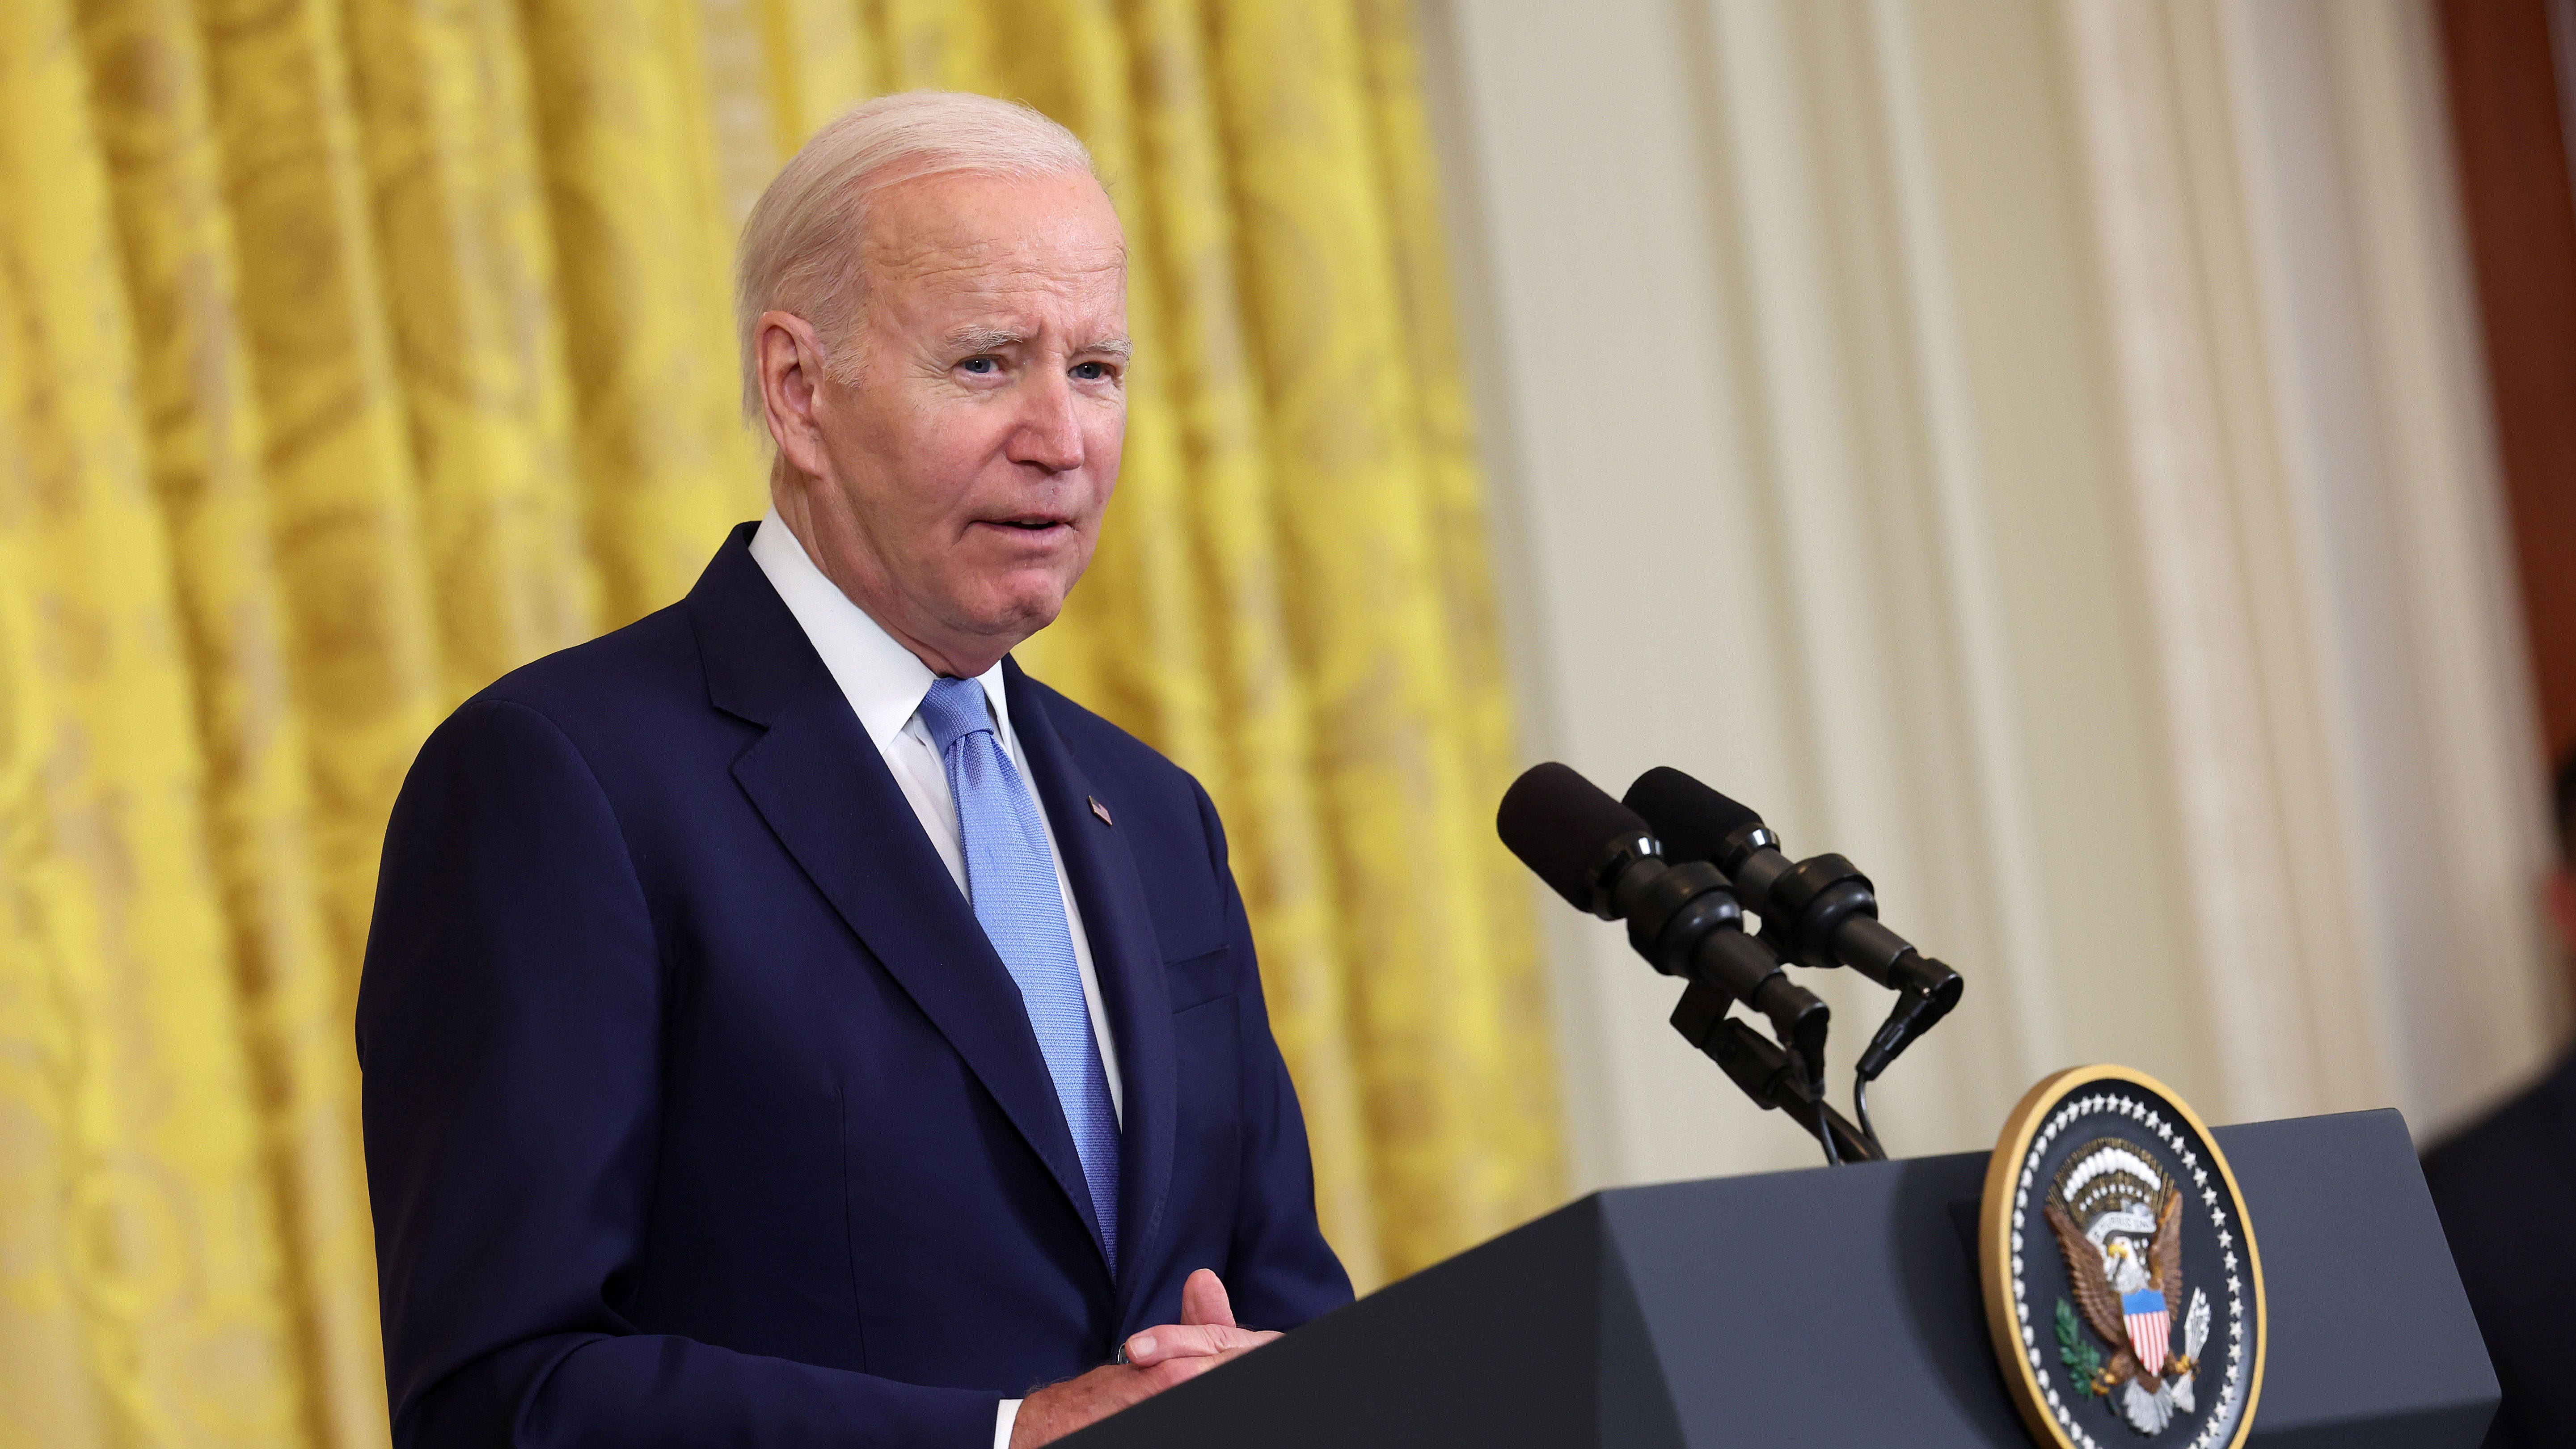 States rejecting Biden’s plan to shake up the Democratic primary calendar